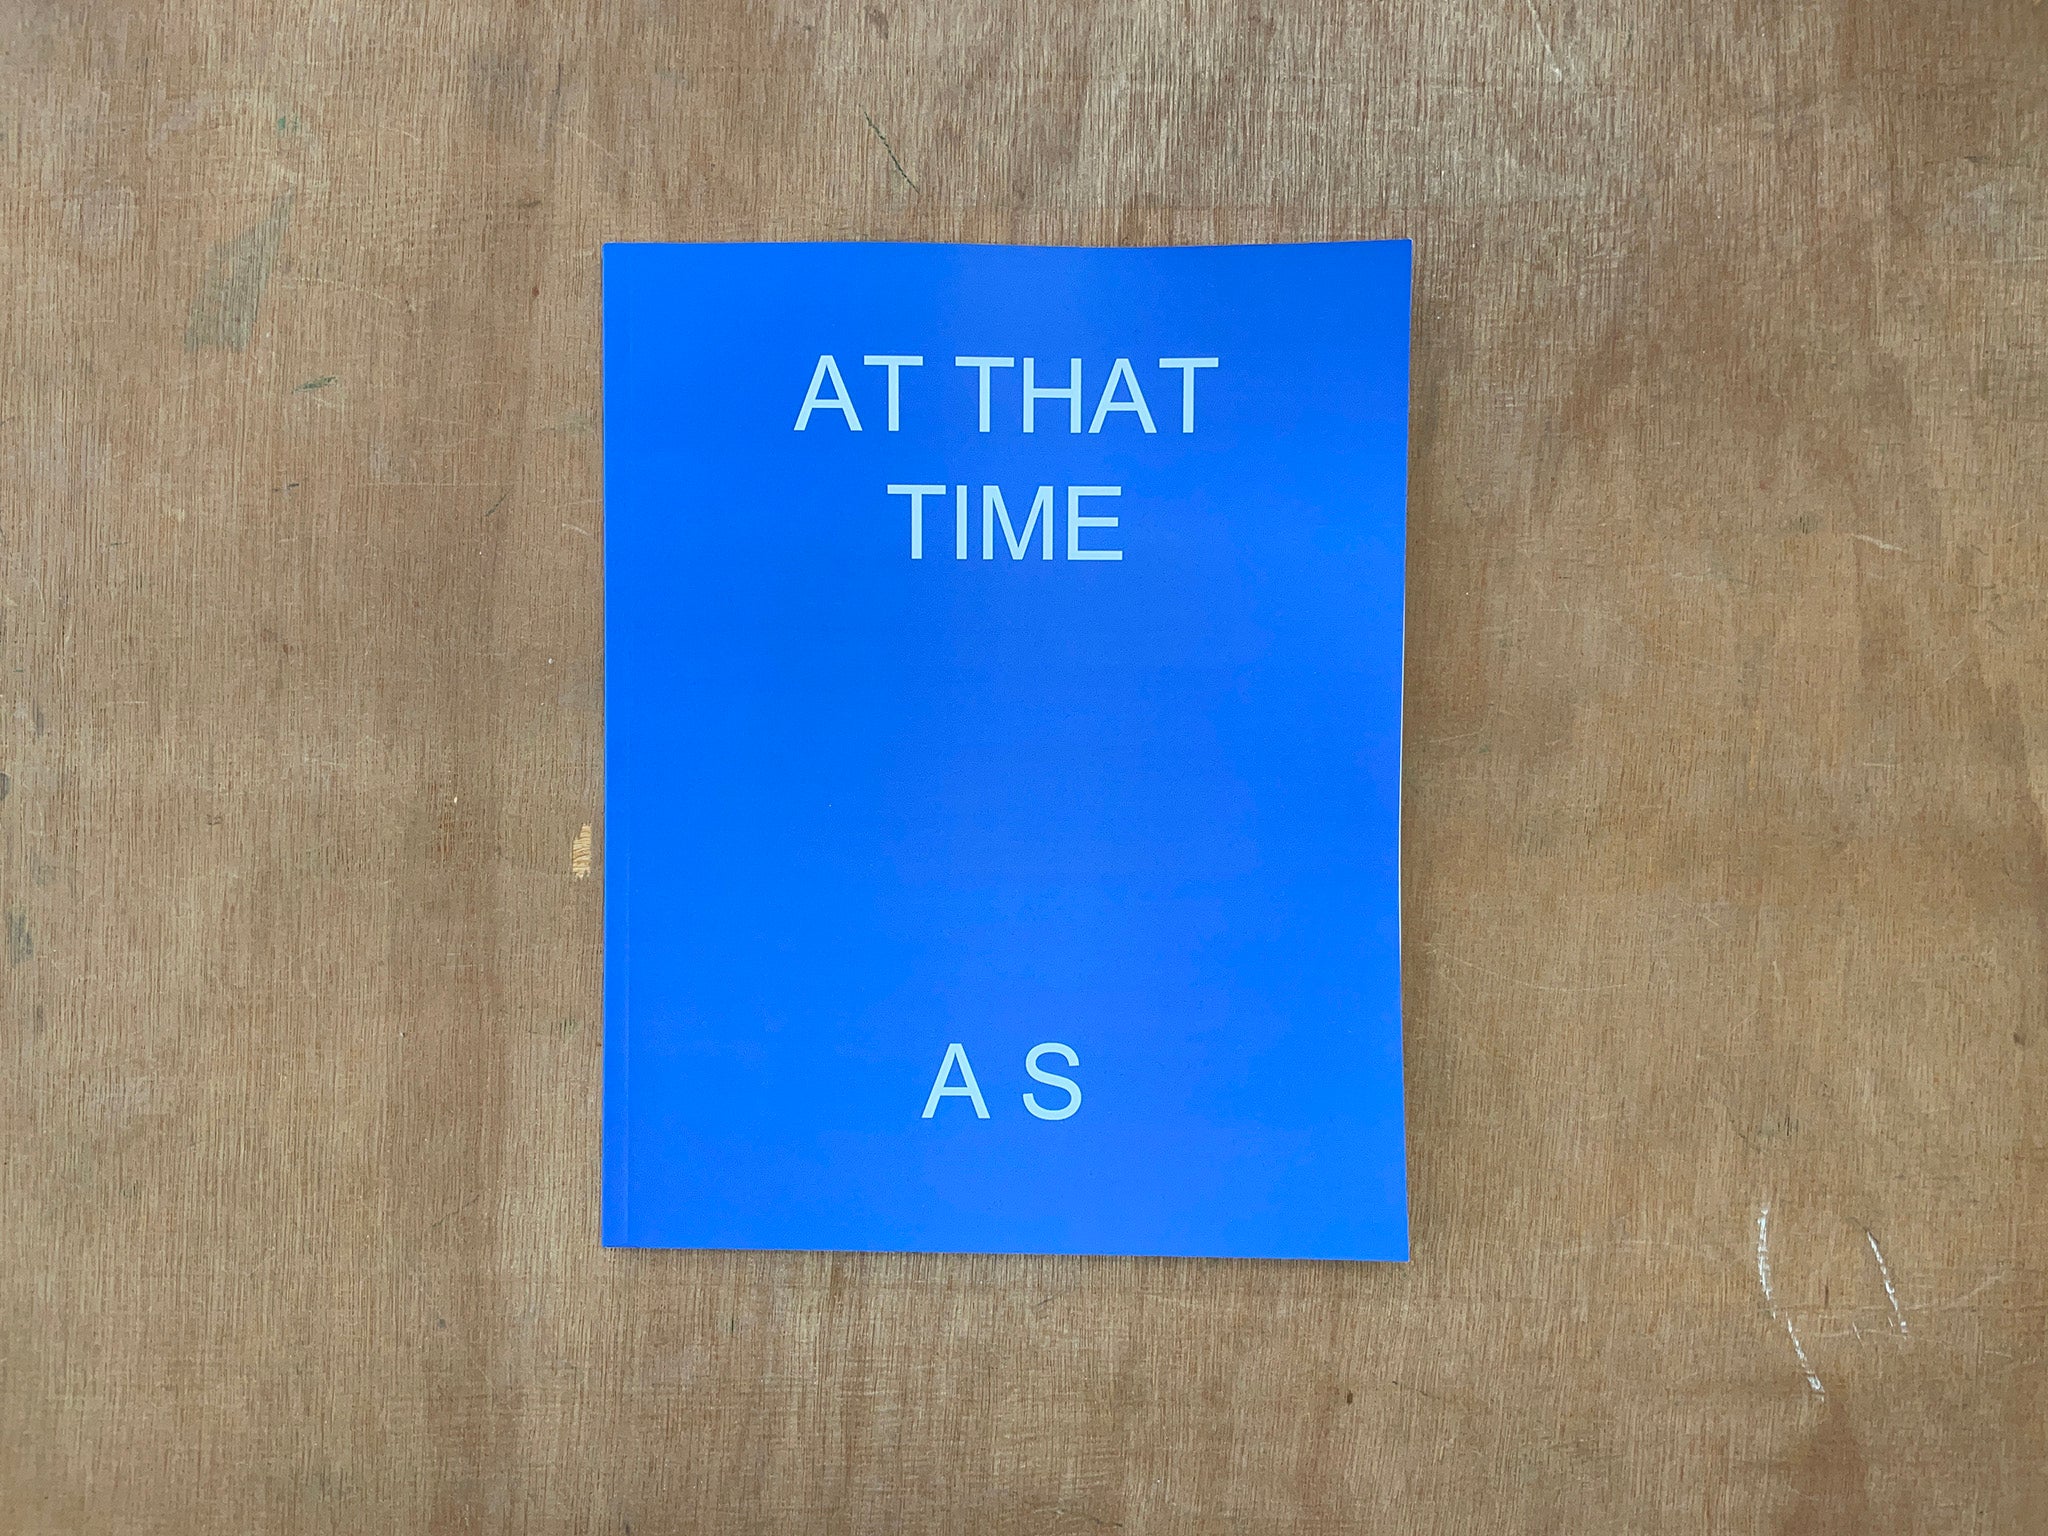 AT THAT TIME by Alan Shipway